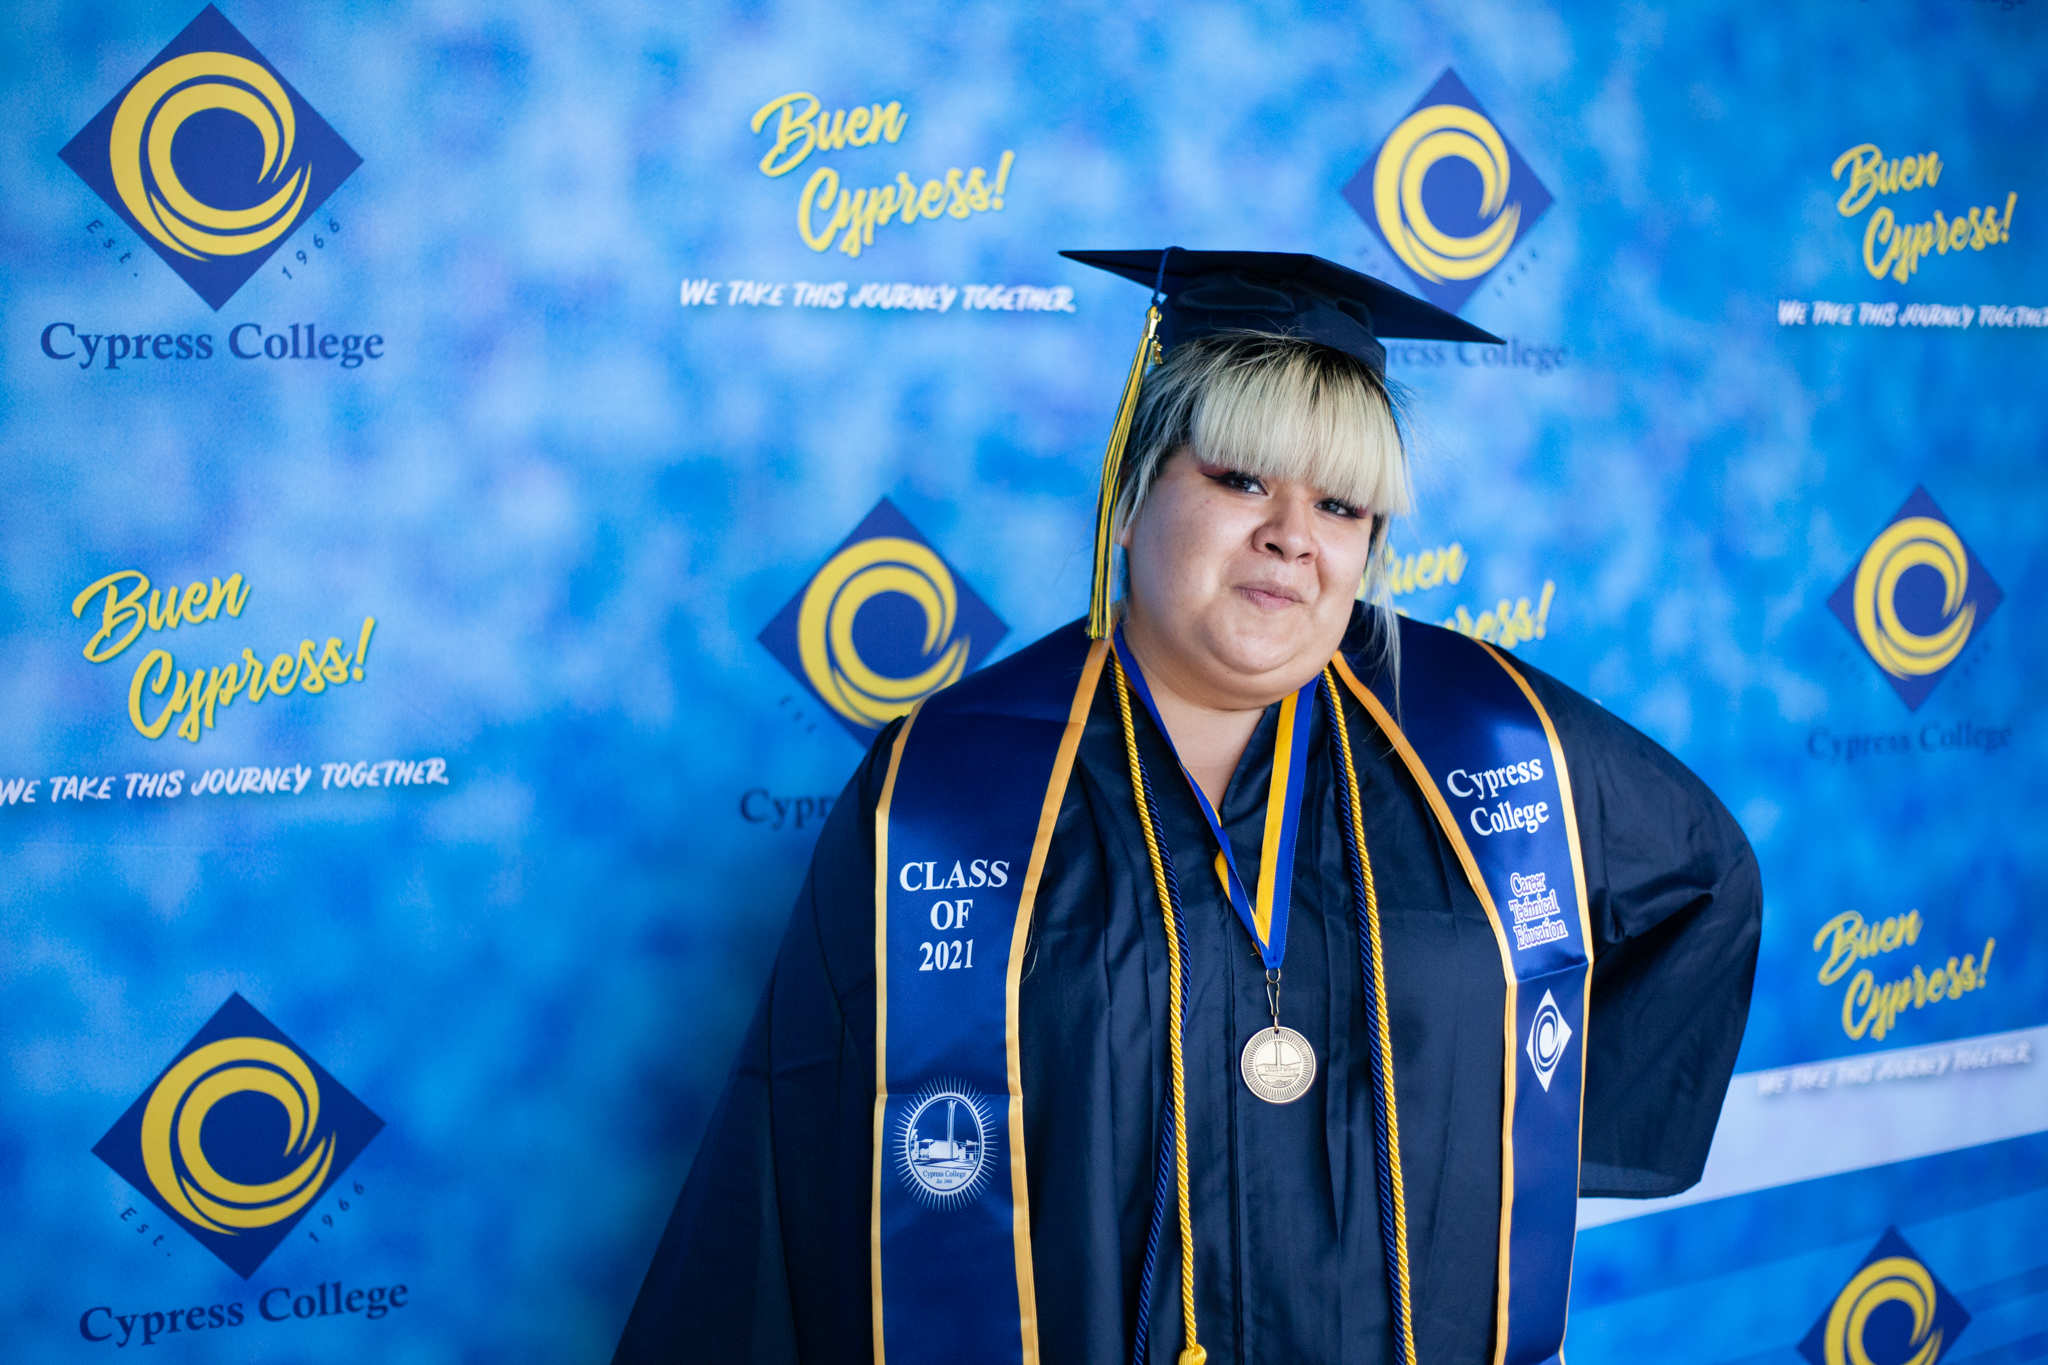 Culinary Arts student Alexandra Camacho poses in front of a blue background.